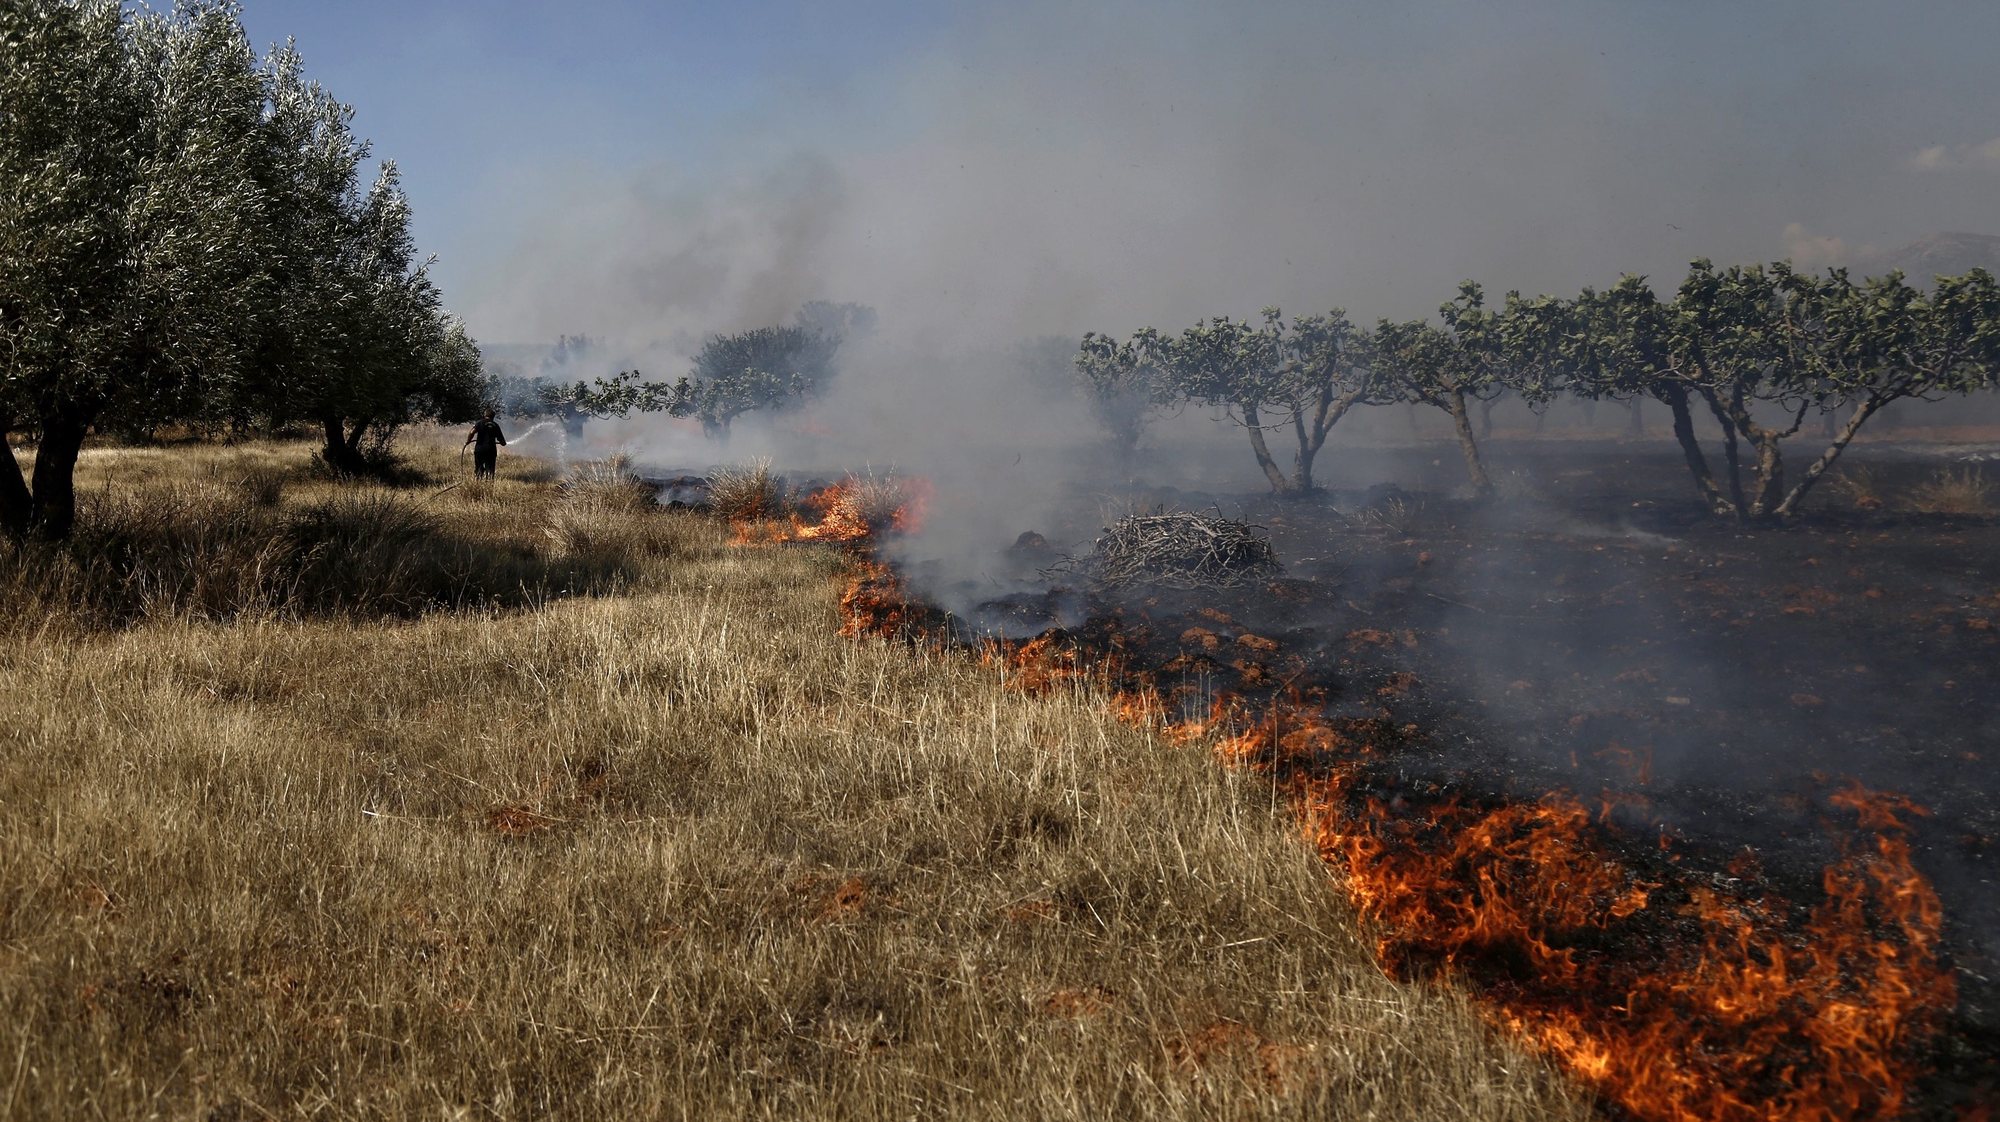 epa05407088 A firefighter tries to extinguish flames during a bush fire in Koropi, near Athens, Greece, 04 July 2016. According to the fire brigade, high fire risk due to high temperatures and strong winds is recorded in different regions of Greece.  EPA/YANNIS KOLESIDIS